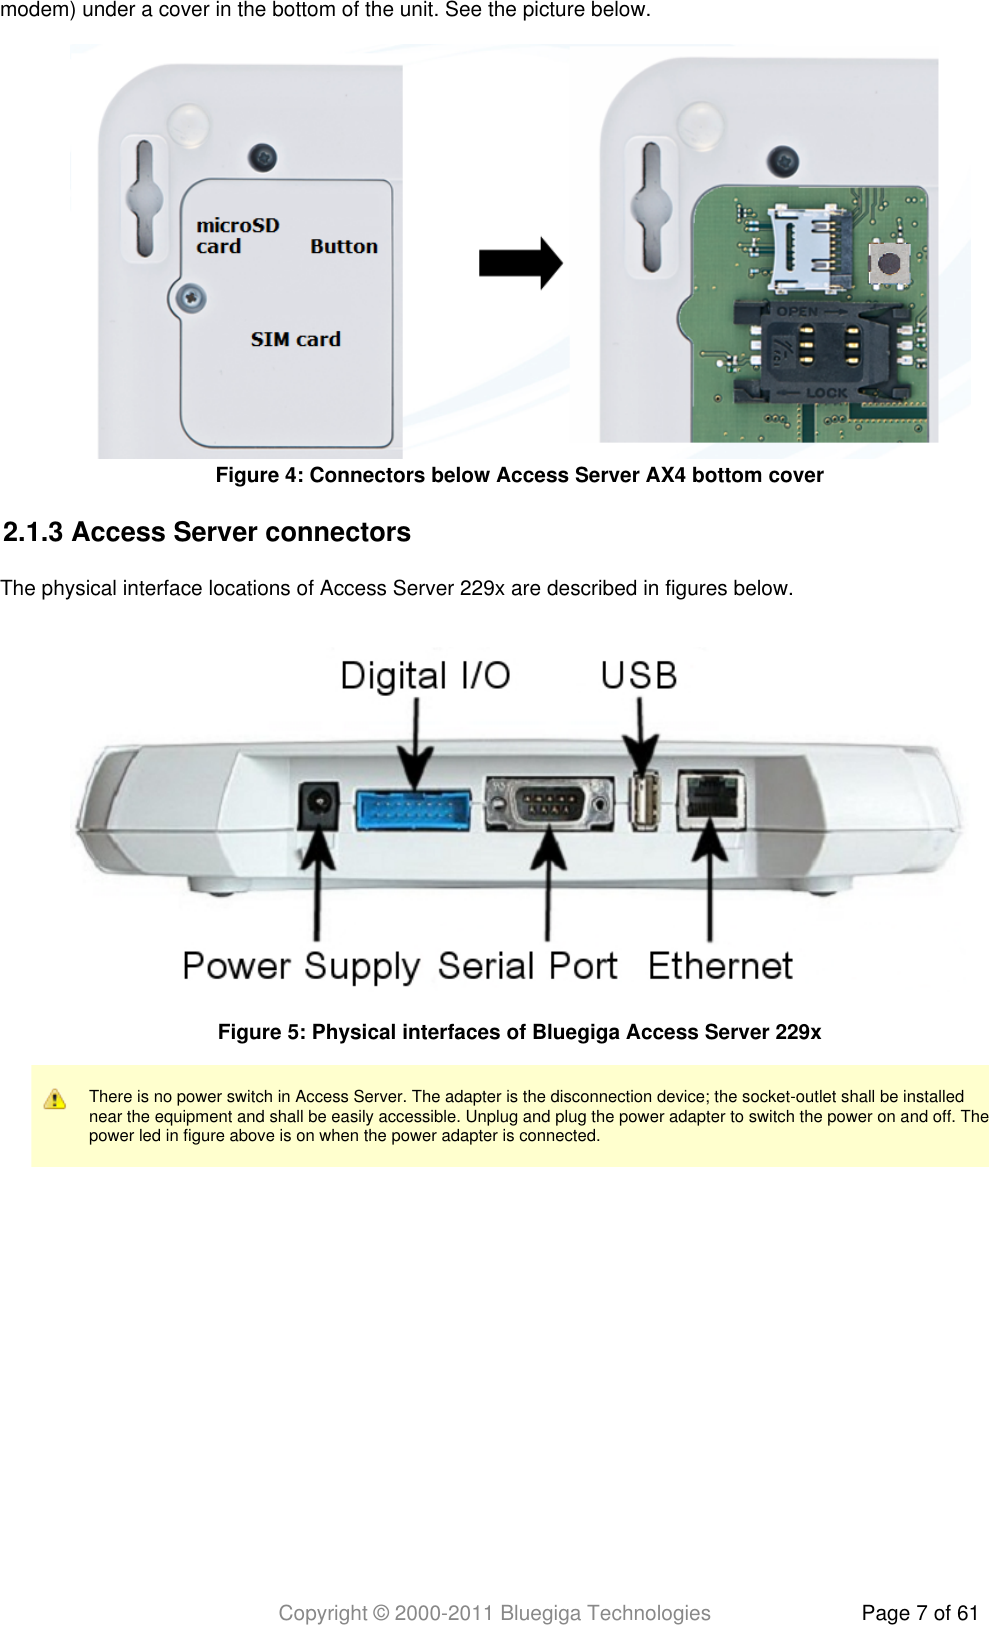 Copyright © 2000-2011 Bluegiga Technologies Page 7 of 61modem) under a cover in the bottom of the unit. See the picture below.2.1.3 Access Server connectorsThe physical interface locations of Access Server 229x are described in figures below.There is no power switch in Access Server. The adapter is the disconnection device; the socket-outlet shall be installednear the equipment and shall be easily accessible. Unplug and plug the power adapter to switch the power on and off. Thepower led in figure above is on when the power adapter is connected.Figure  : Connectors below Access Server AX4 bottom cover4Figure  : Physical interfaces of Bluegiga Access Server 229x5